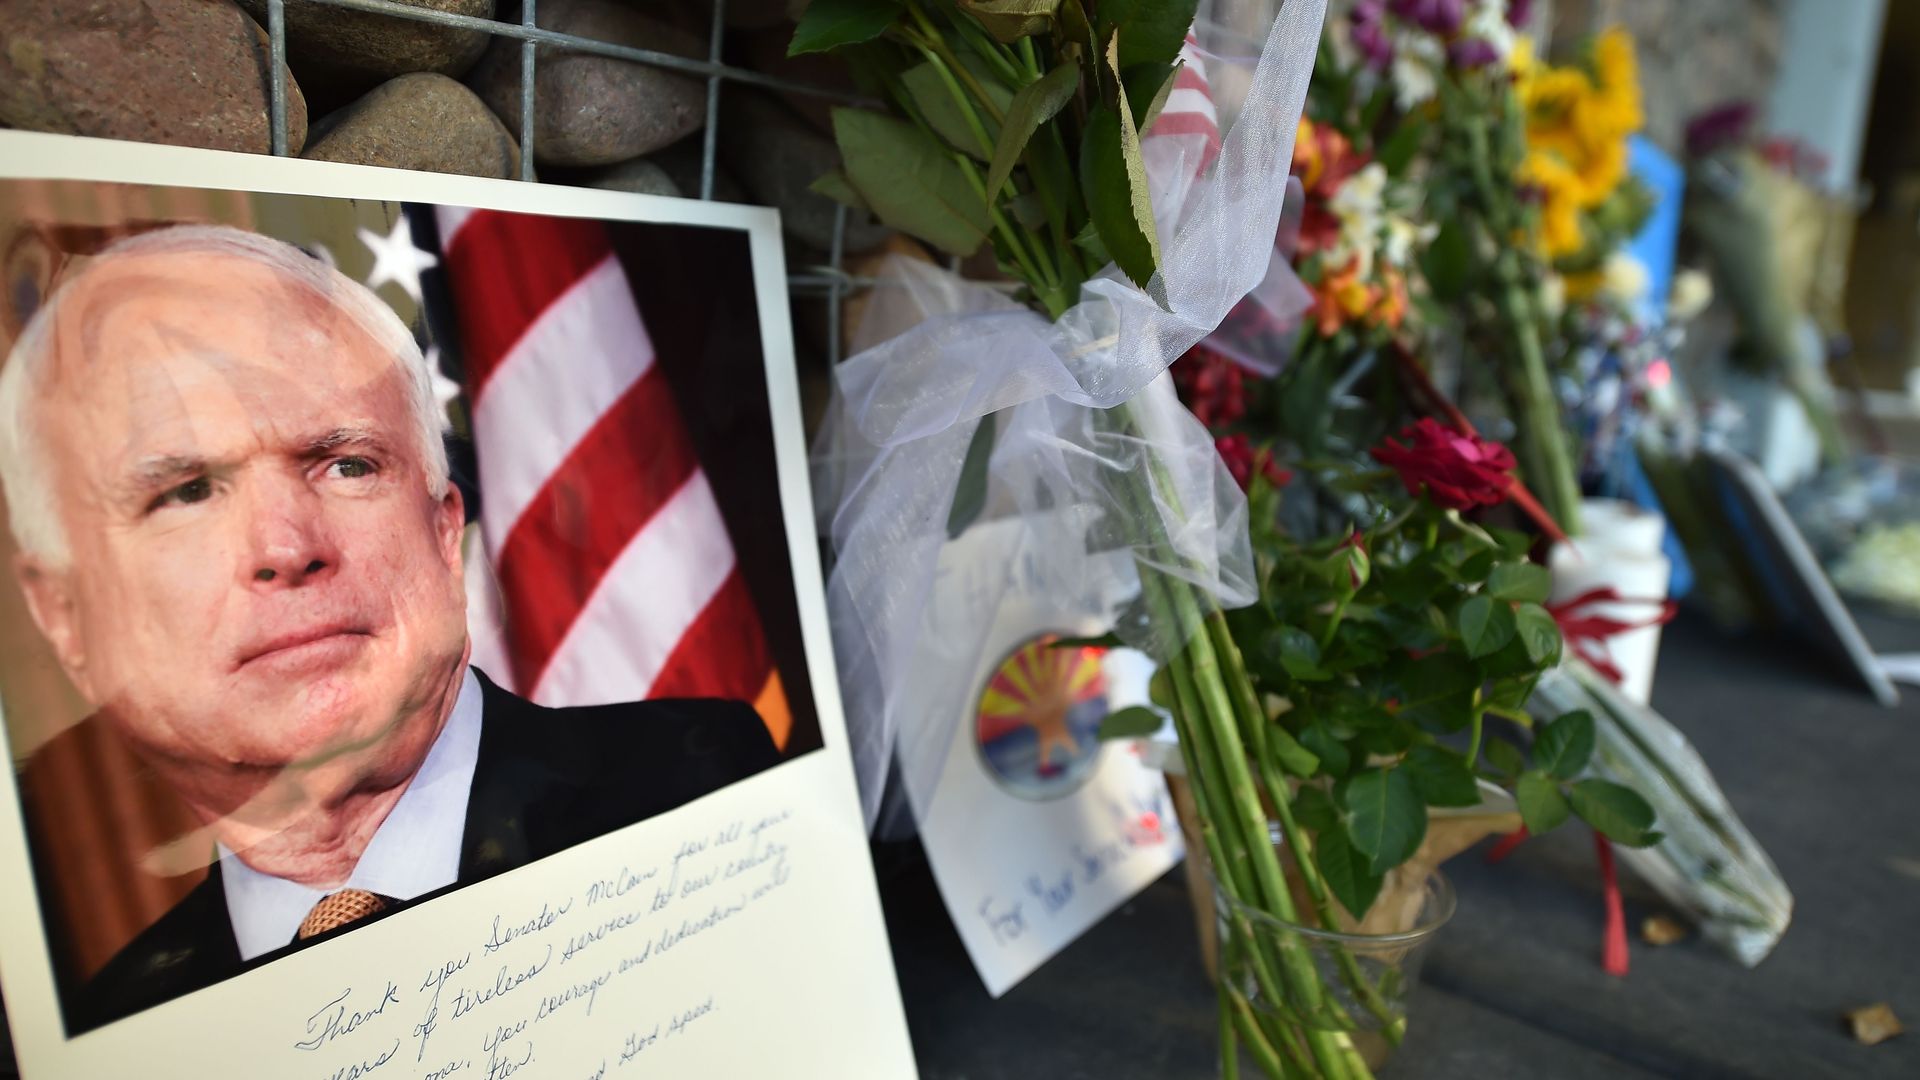 A makeshift memorial to Sen. John McCain outside his office in Phoenix, Arizona. Photo: Robyn Beck/AFP/Getty Images